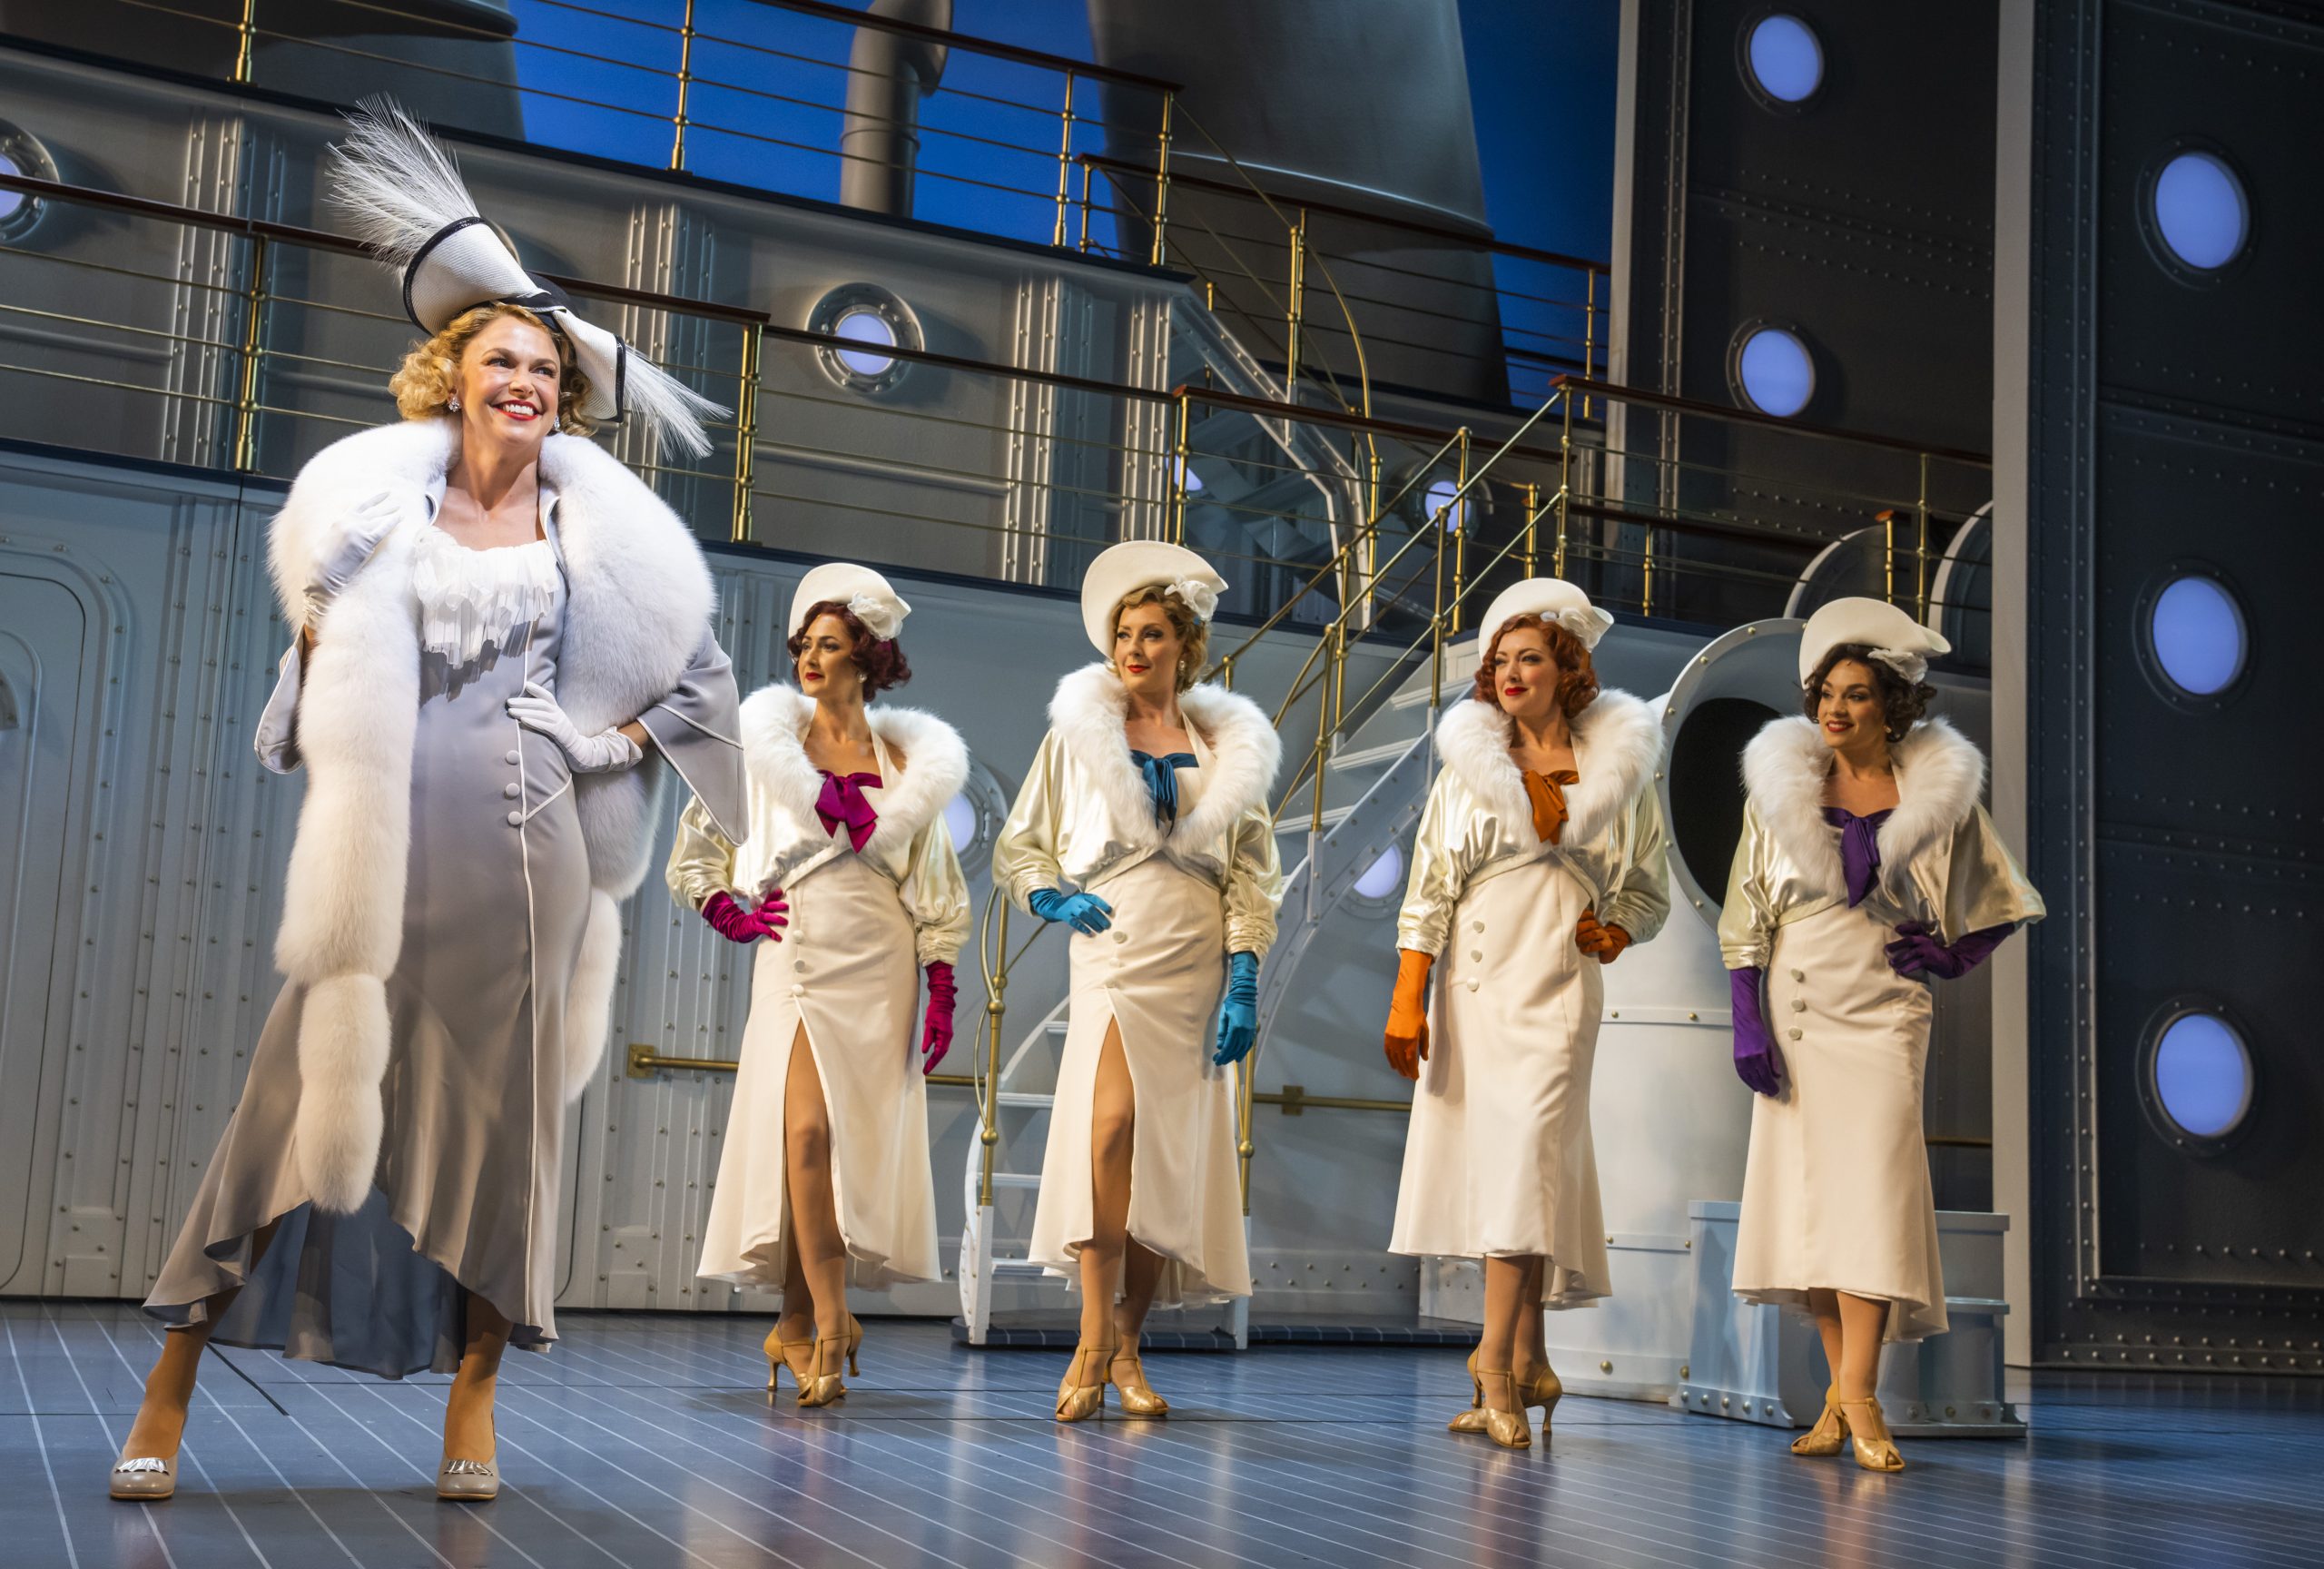 Anything Goes sails into cinemas in Australia